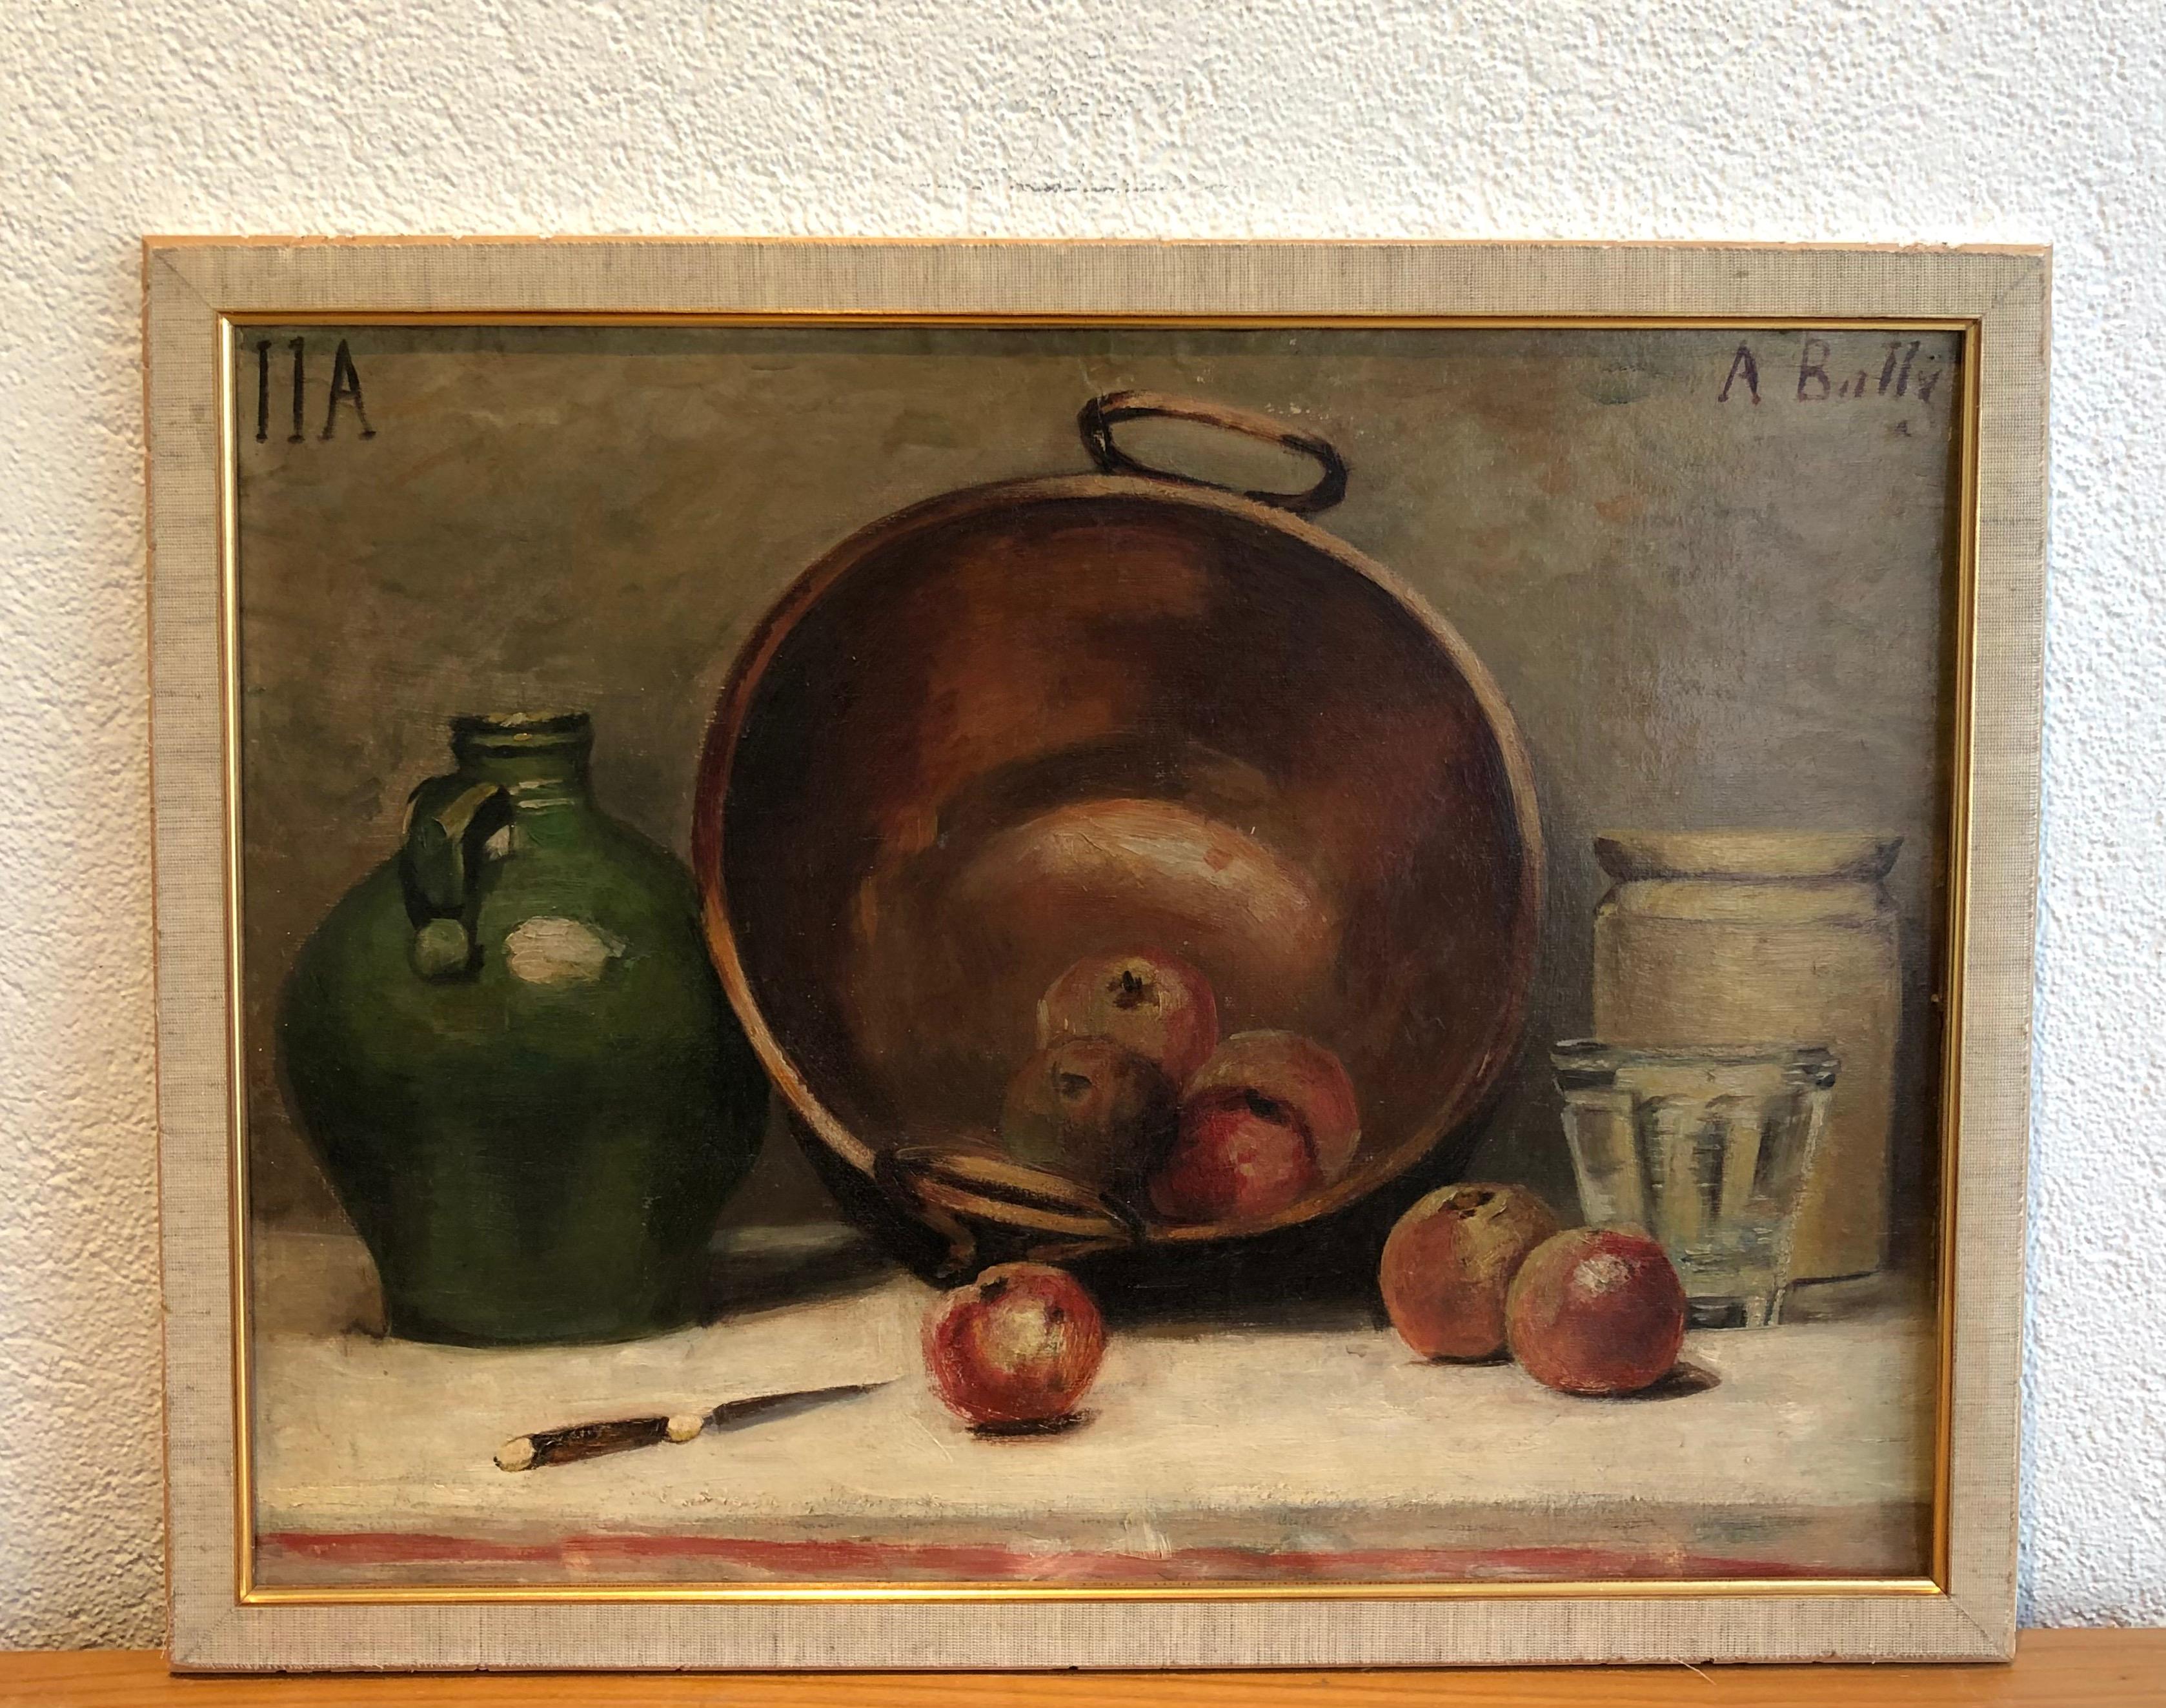 Still life with copper, pottery and apples - Painting by A. Bally